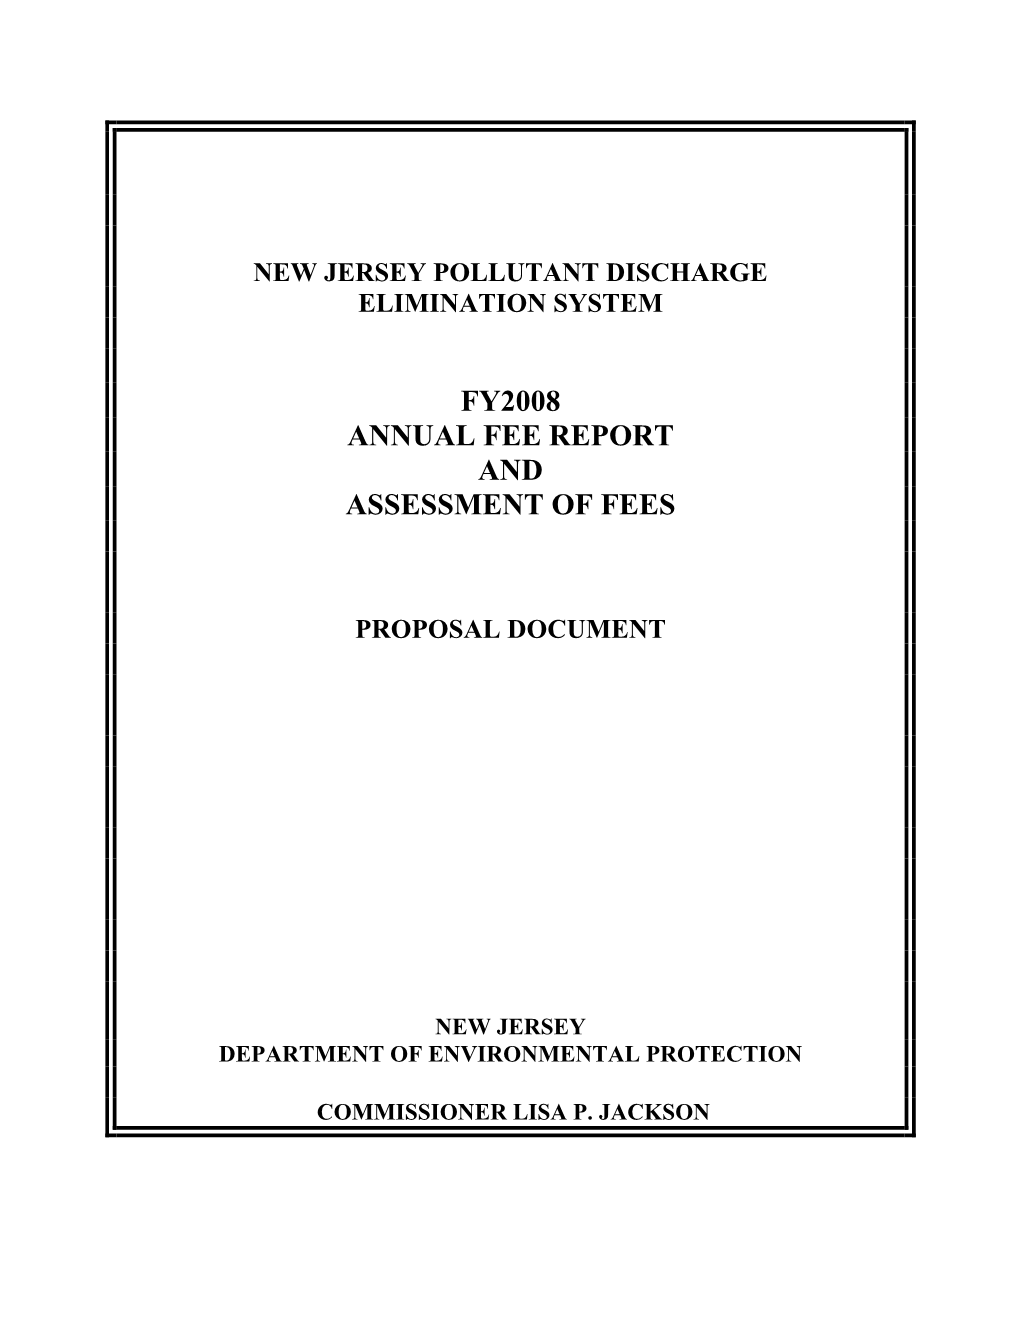 Fy2008 Annual Fee Report and Assessment of Fees